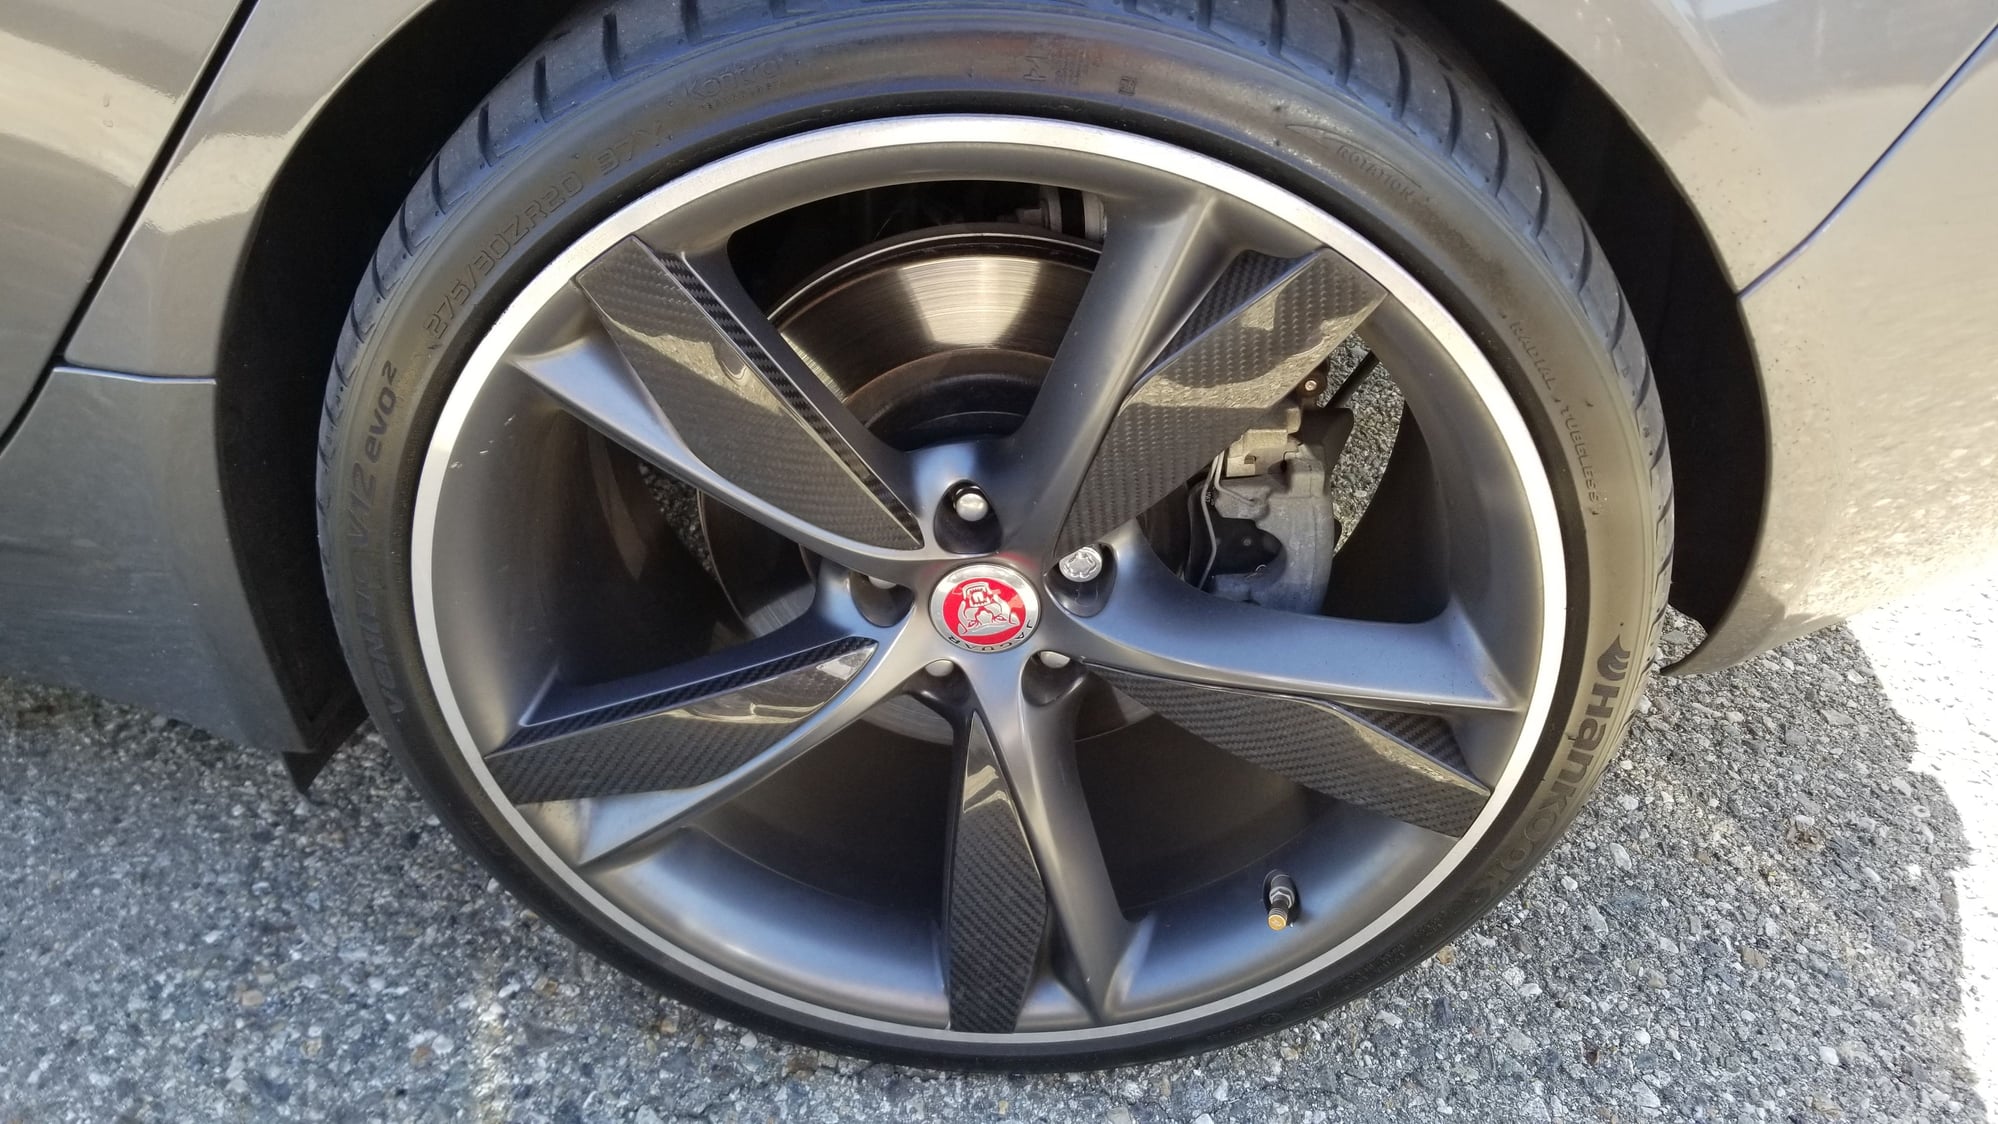 Wheels and Tires/Axles - 2 rear carbon blade wheels 20x10.5 - Used - All Years Jaguar F-Type - All Years Jaguar XE - All Years Jaguar XF - All Years Jaguar F-Pace - All Years Jaguar E-Pace - All Years Jaguar XJ - Highland, CA 92346, United States